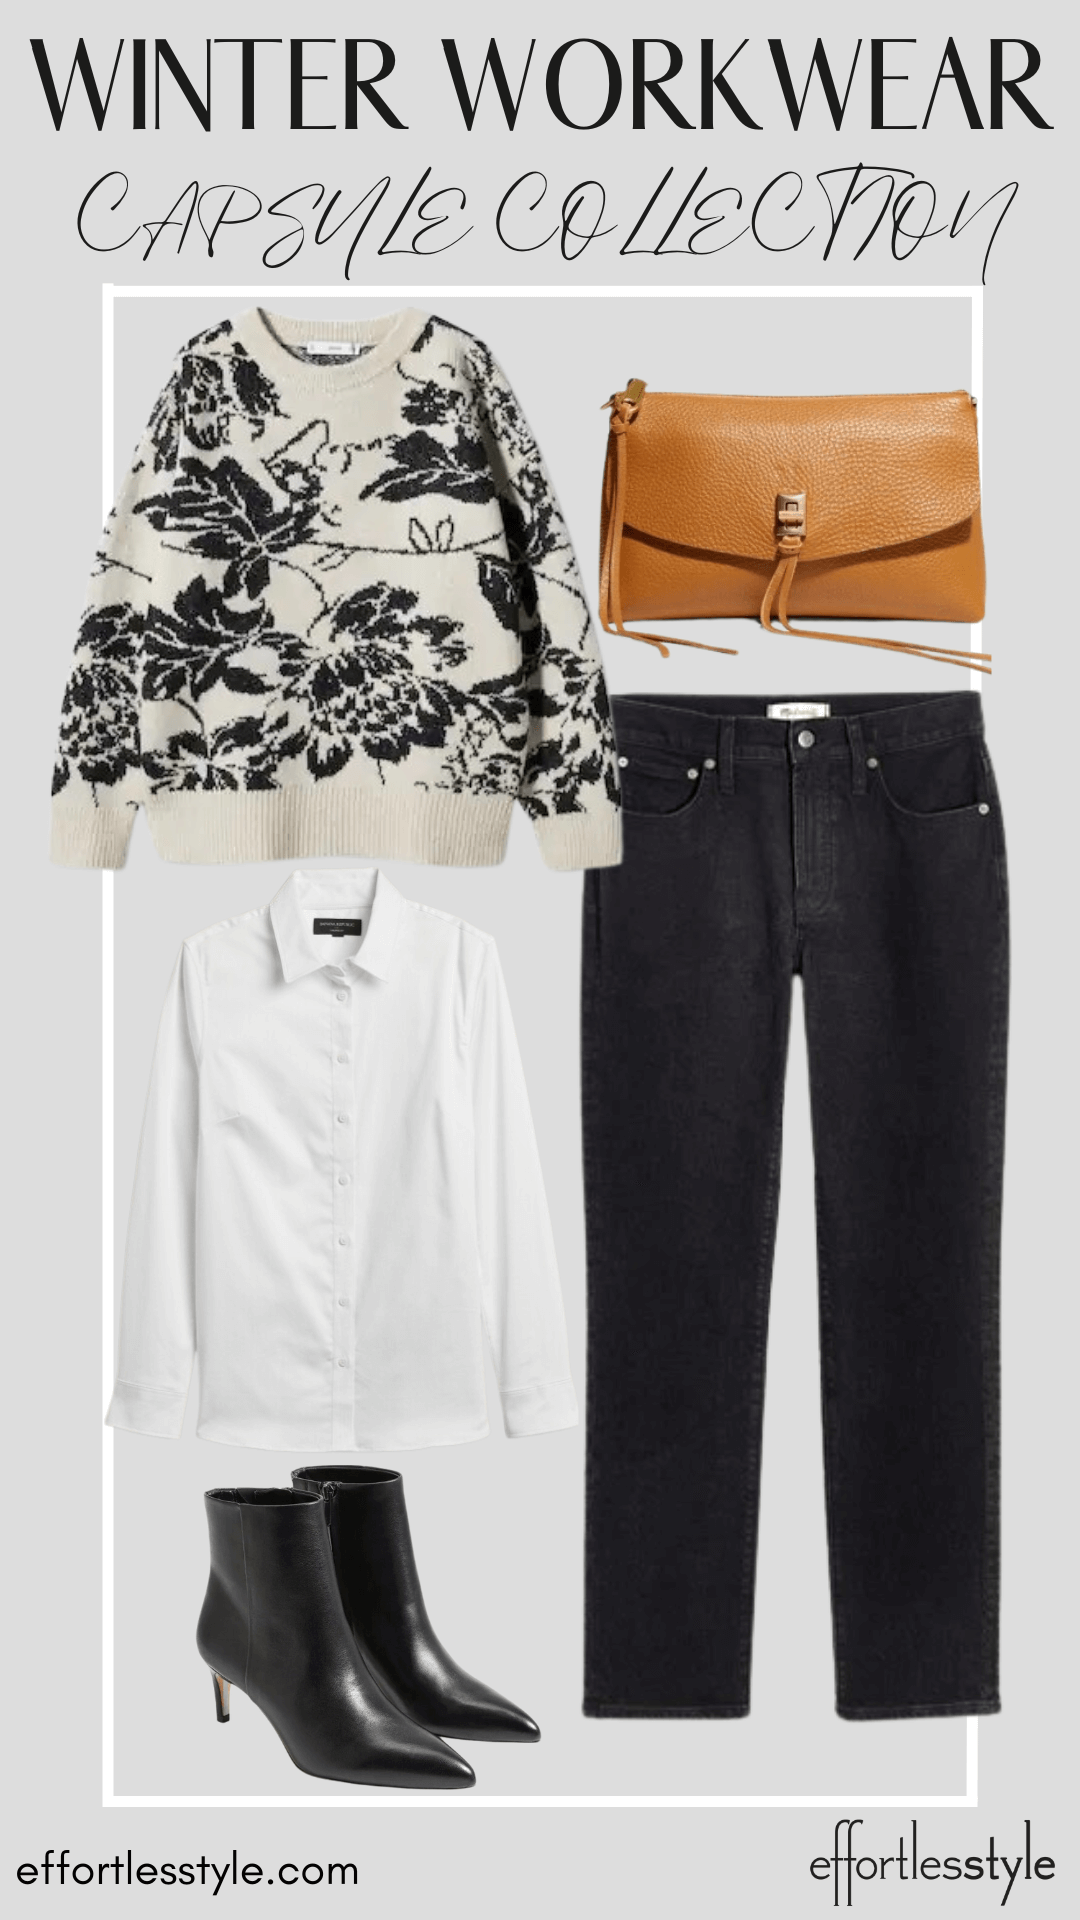 How To Wear Our Winter Workwear Capsule Wardrobe - Part 2 Printed Sweater & Black Jeans how to style a casual sweater for work how to wear a casual sweater to the office what to wear on casual Fridays cognac crossbody affordable leather bootie